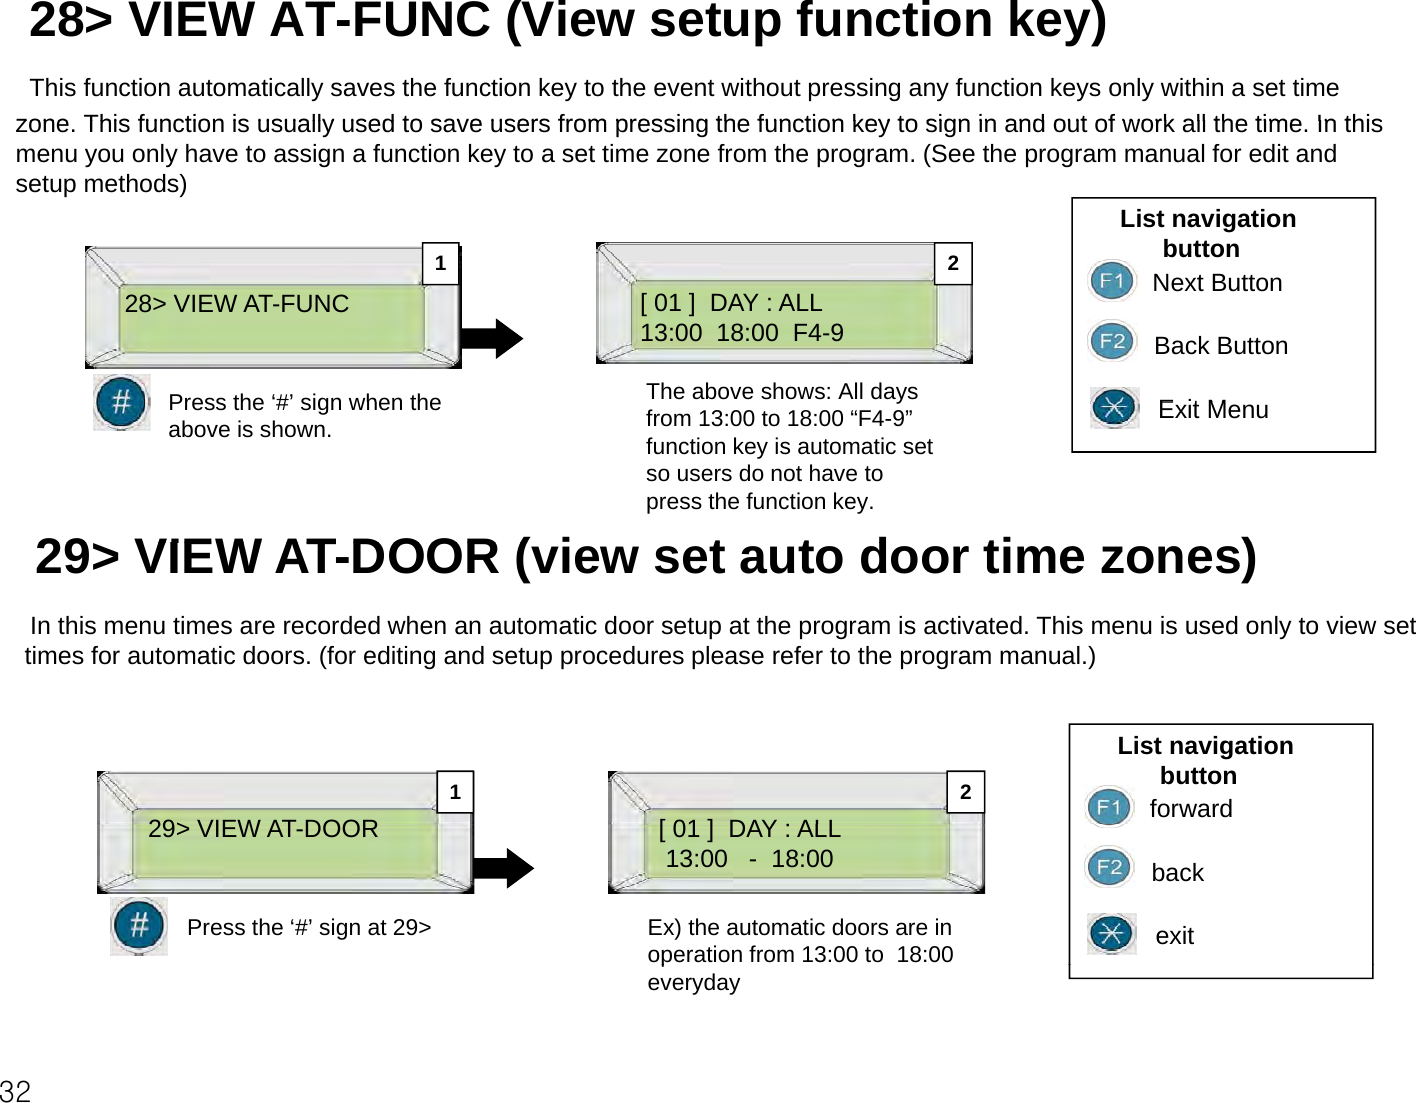 28&gt; VIEW AT-FUNC (View setup function key)This function automatically saves the function key to the event without pressing any function keys only within a set time zone This function is usually used to save users from pressing the function key to sign in and out of work all the time Inthiszone. This function is usually used to save users from pressing the function key to sign in and out of work all the time. In this menu you only have to assign a function key to a set time zone from the program. (See the program manual for edit and setup methods)List navigation button1228&gt; VIEW AT-FUNC [ 01 ]  DAY : ALL13:00  18:00  F4-9Next ButtonBack ButtonEitMPress the‘#’sign when theThe above shows: All days 12Exit MenuPress the # sign when the above is shown.yfrom 13:00 to 18:00 “F4-9” function key is automatic set so users do not have to press the function key.29&gt; VIEW ATDOOR ( i t t d ti )29&gt; VIEW AT-DOOR (view set auto door time zones)In this menu times are recorded when an automatic door setup at the program is activated. This menu is used only to view set times for automatic doors. (for editing and setup procedures please refer to the program manual.)29&gt; VIEW ATDOOR[01] DAY ALLList navigation buttonforward2129&gt; VIEW AT-DOOR[ 01 ]  DAY : ALL13:00   - 18:00 backexitEx) the automatic doors are in operation from 13:00 to  18:00 Press the ‘#’ sign at 29&gt;32peveryday